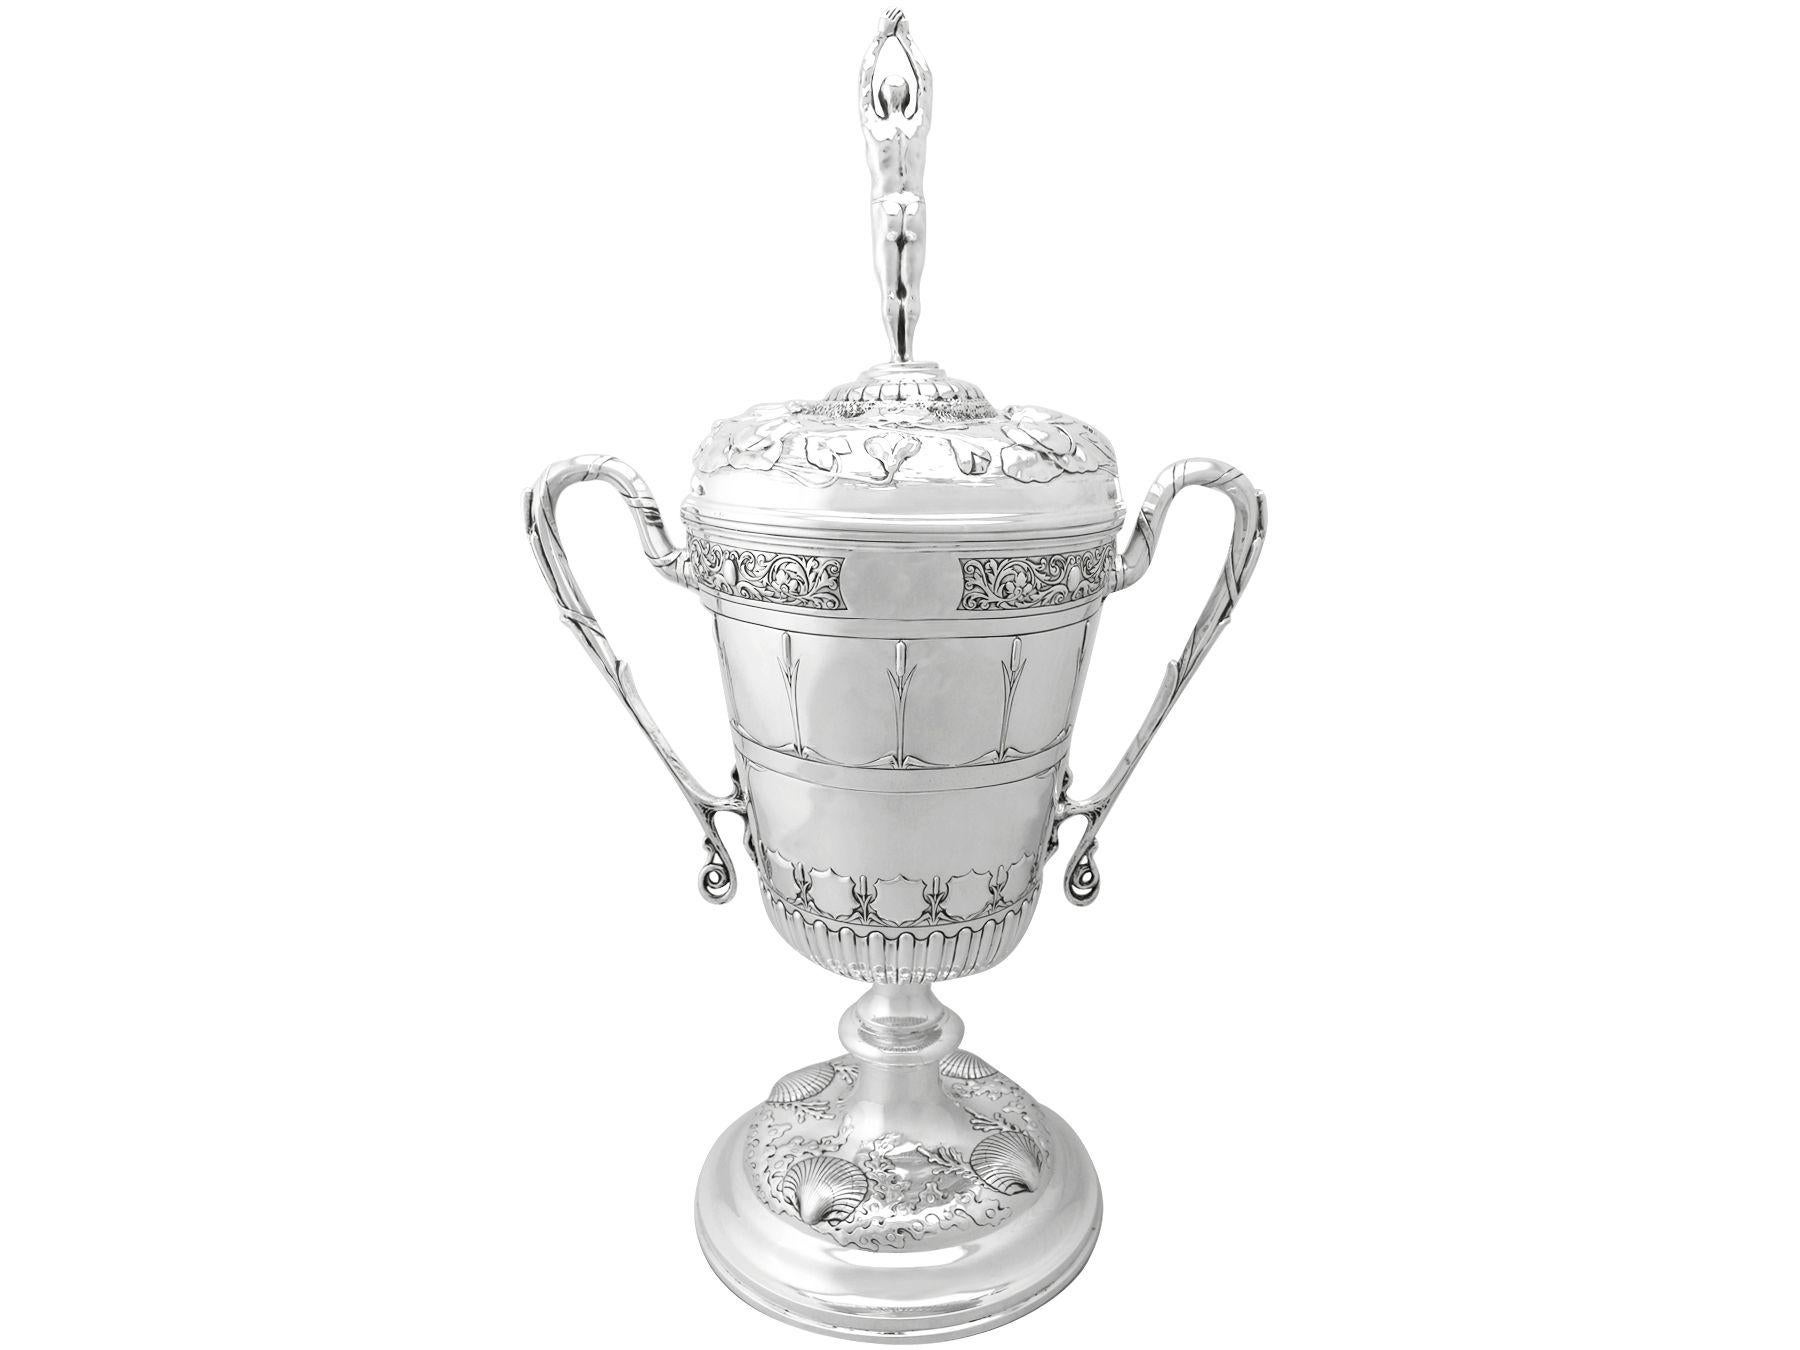 Art Nouveau Antique Edwardian Sterling Silver Presentation or Champagne Cup and Cover For Sale